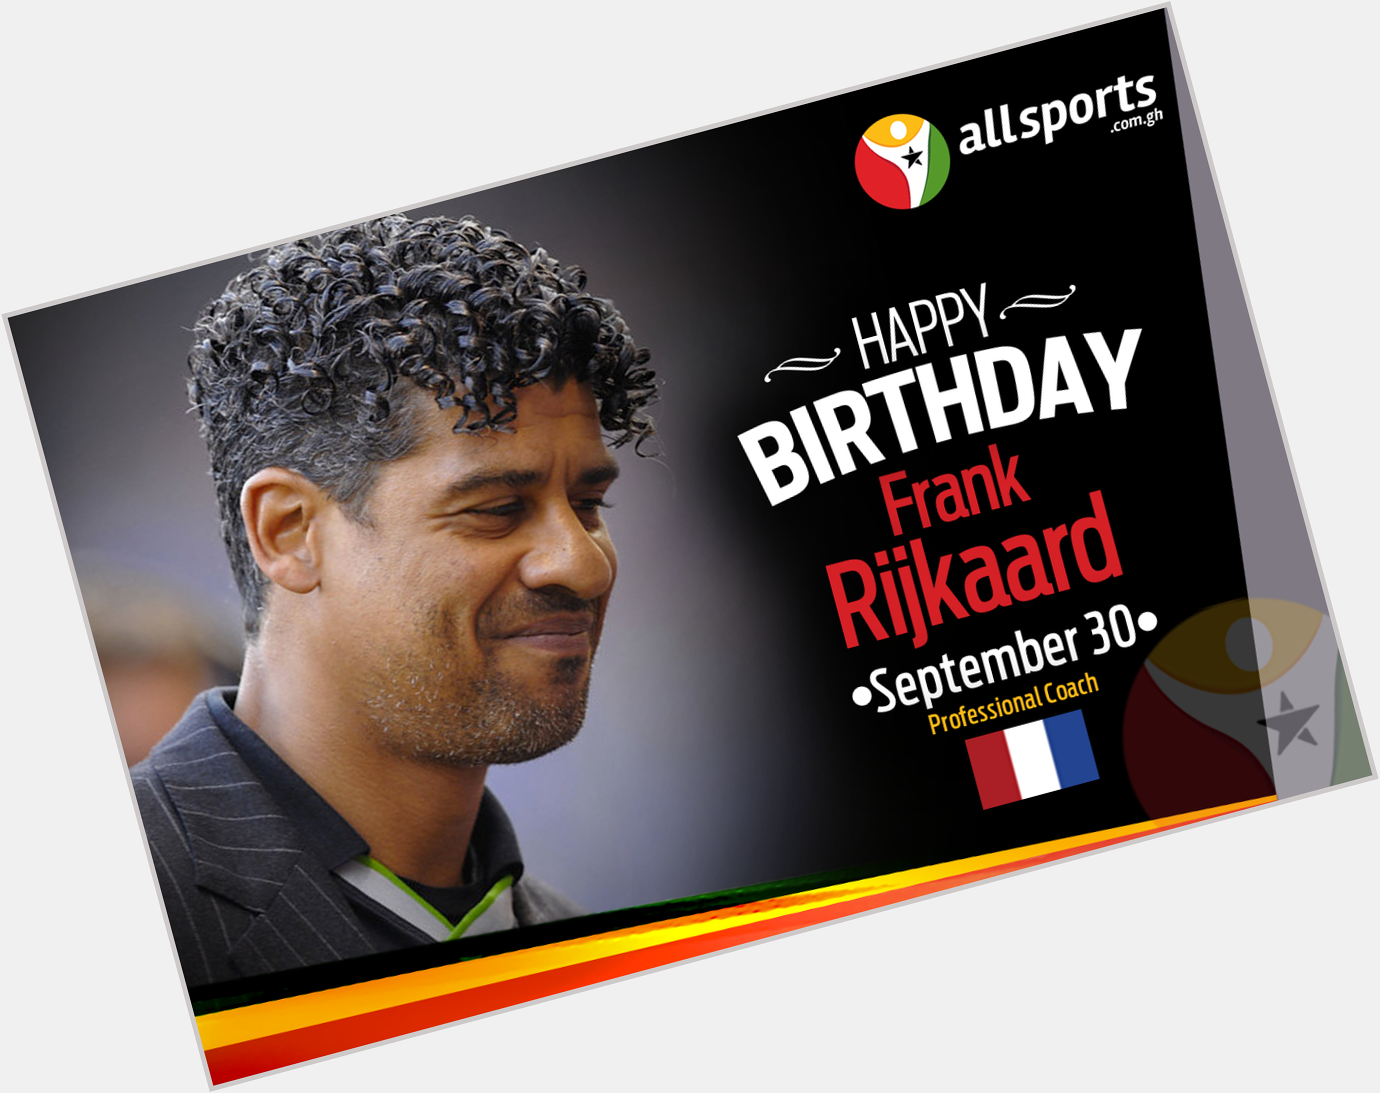 AllSportsGh wishes former and Dutch legend, Frank Rijkaard a HAPPY BIRTHDAY as he turns 53 today. 